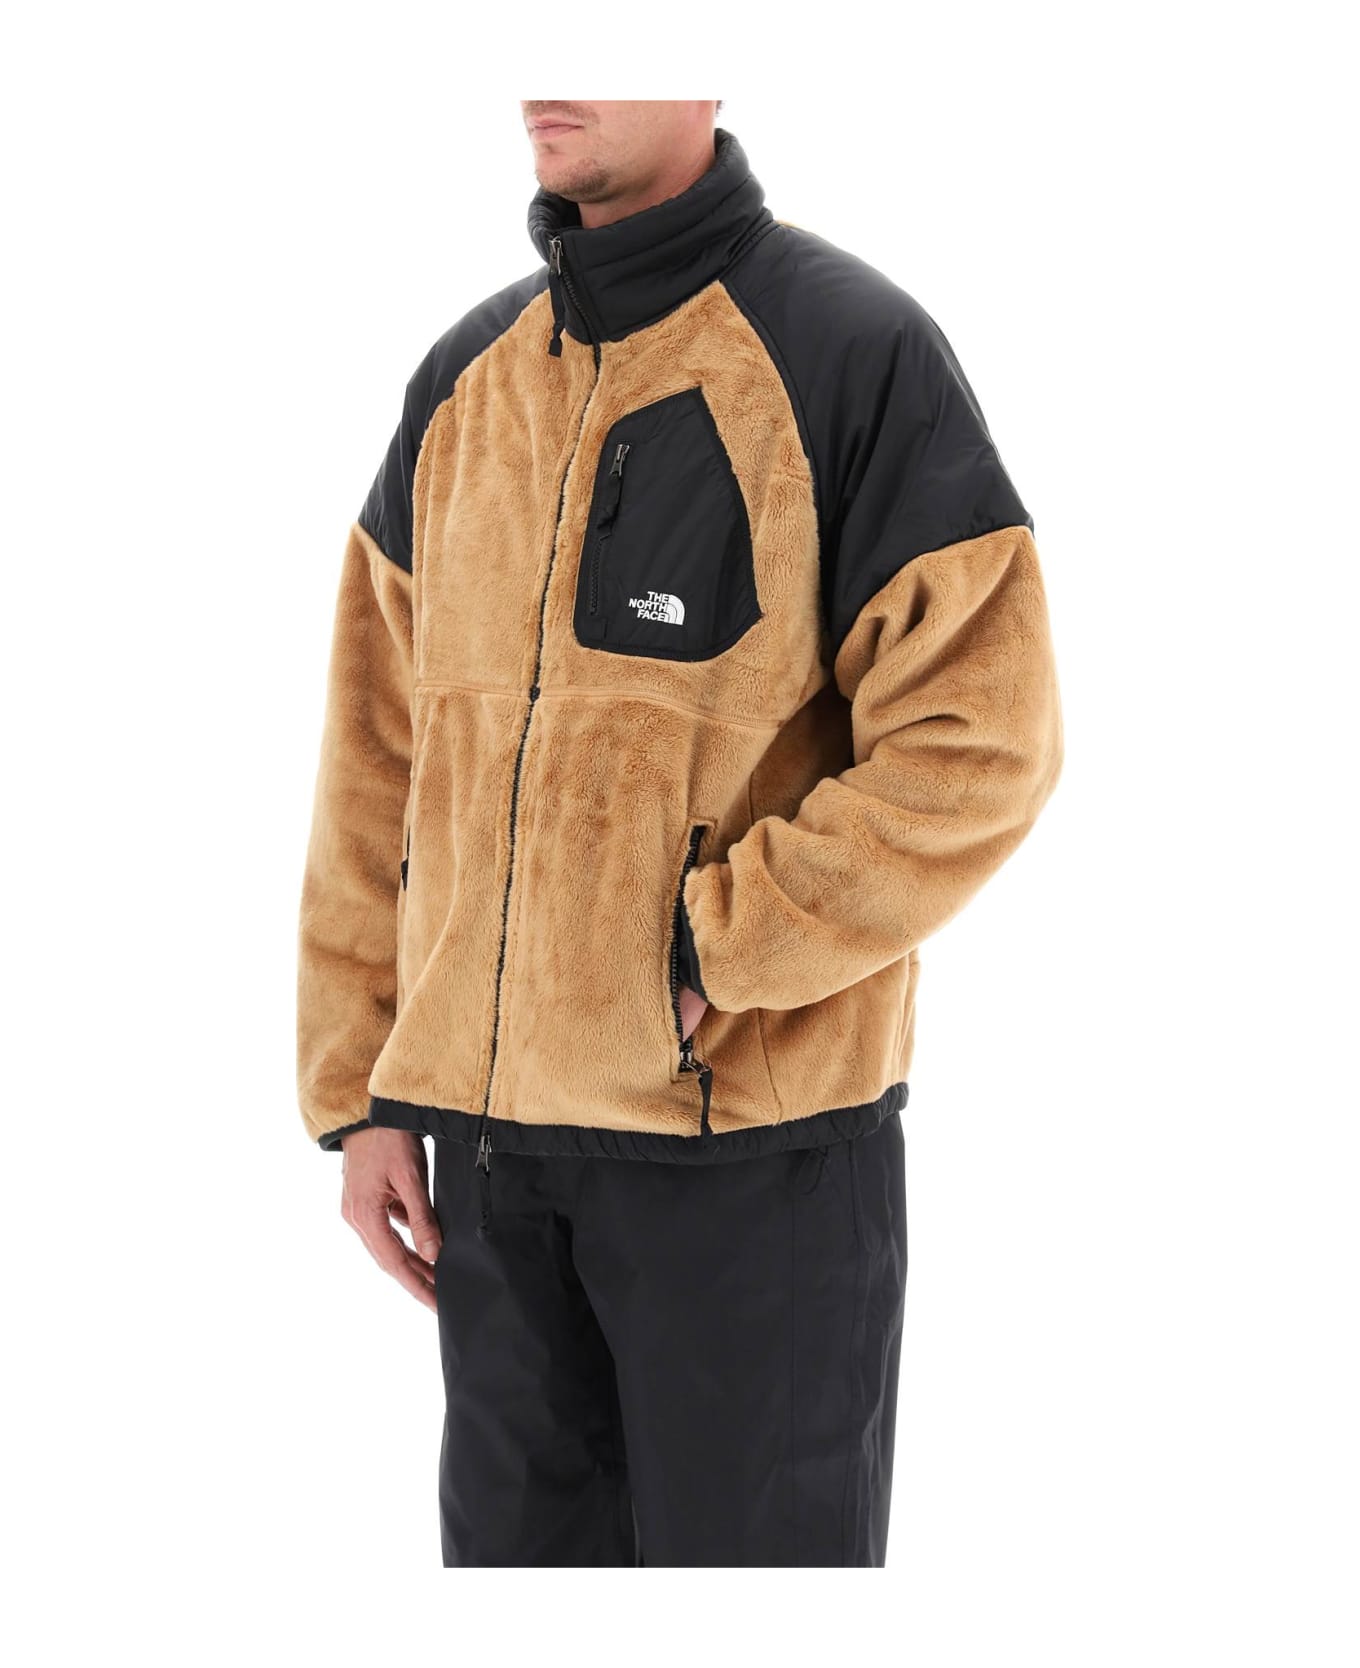 The North Face Fleece Jacket With Nylon Inserts - ALMOND BUTTERTNF BLACK (Beige)